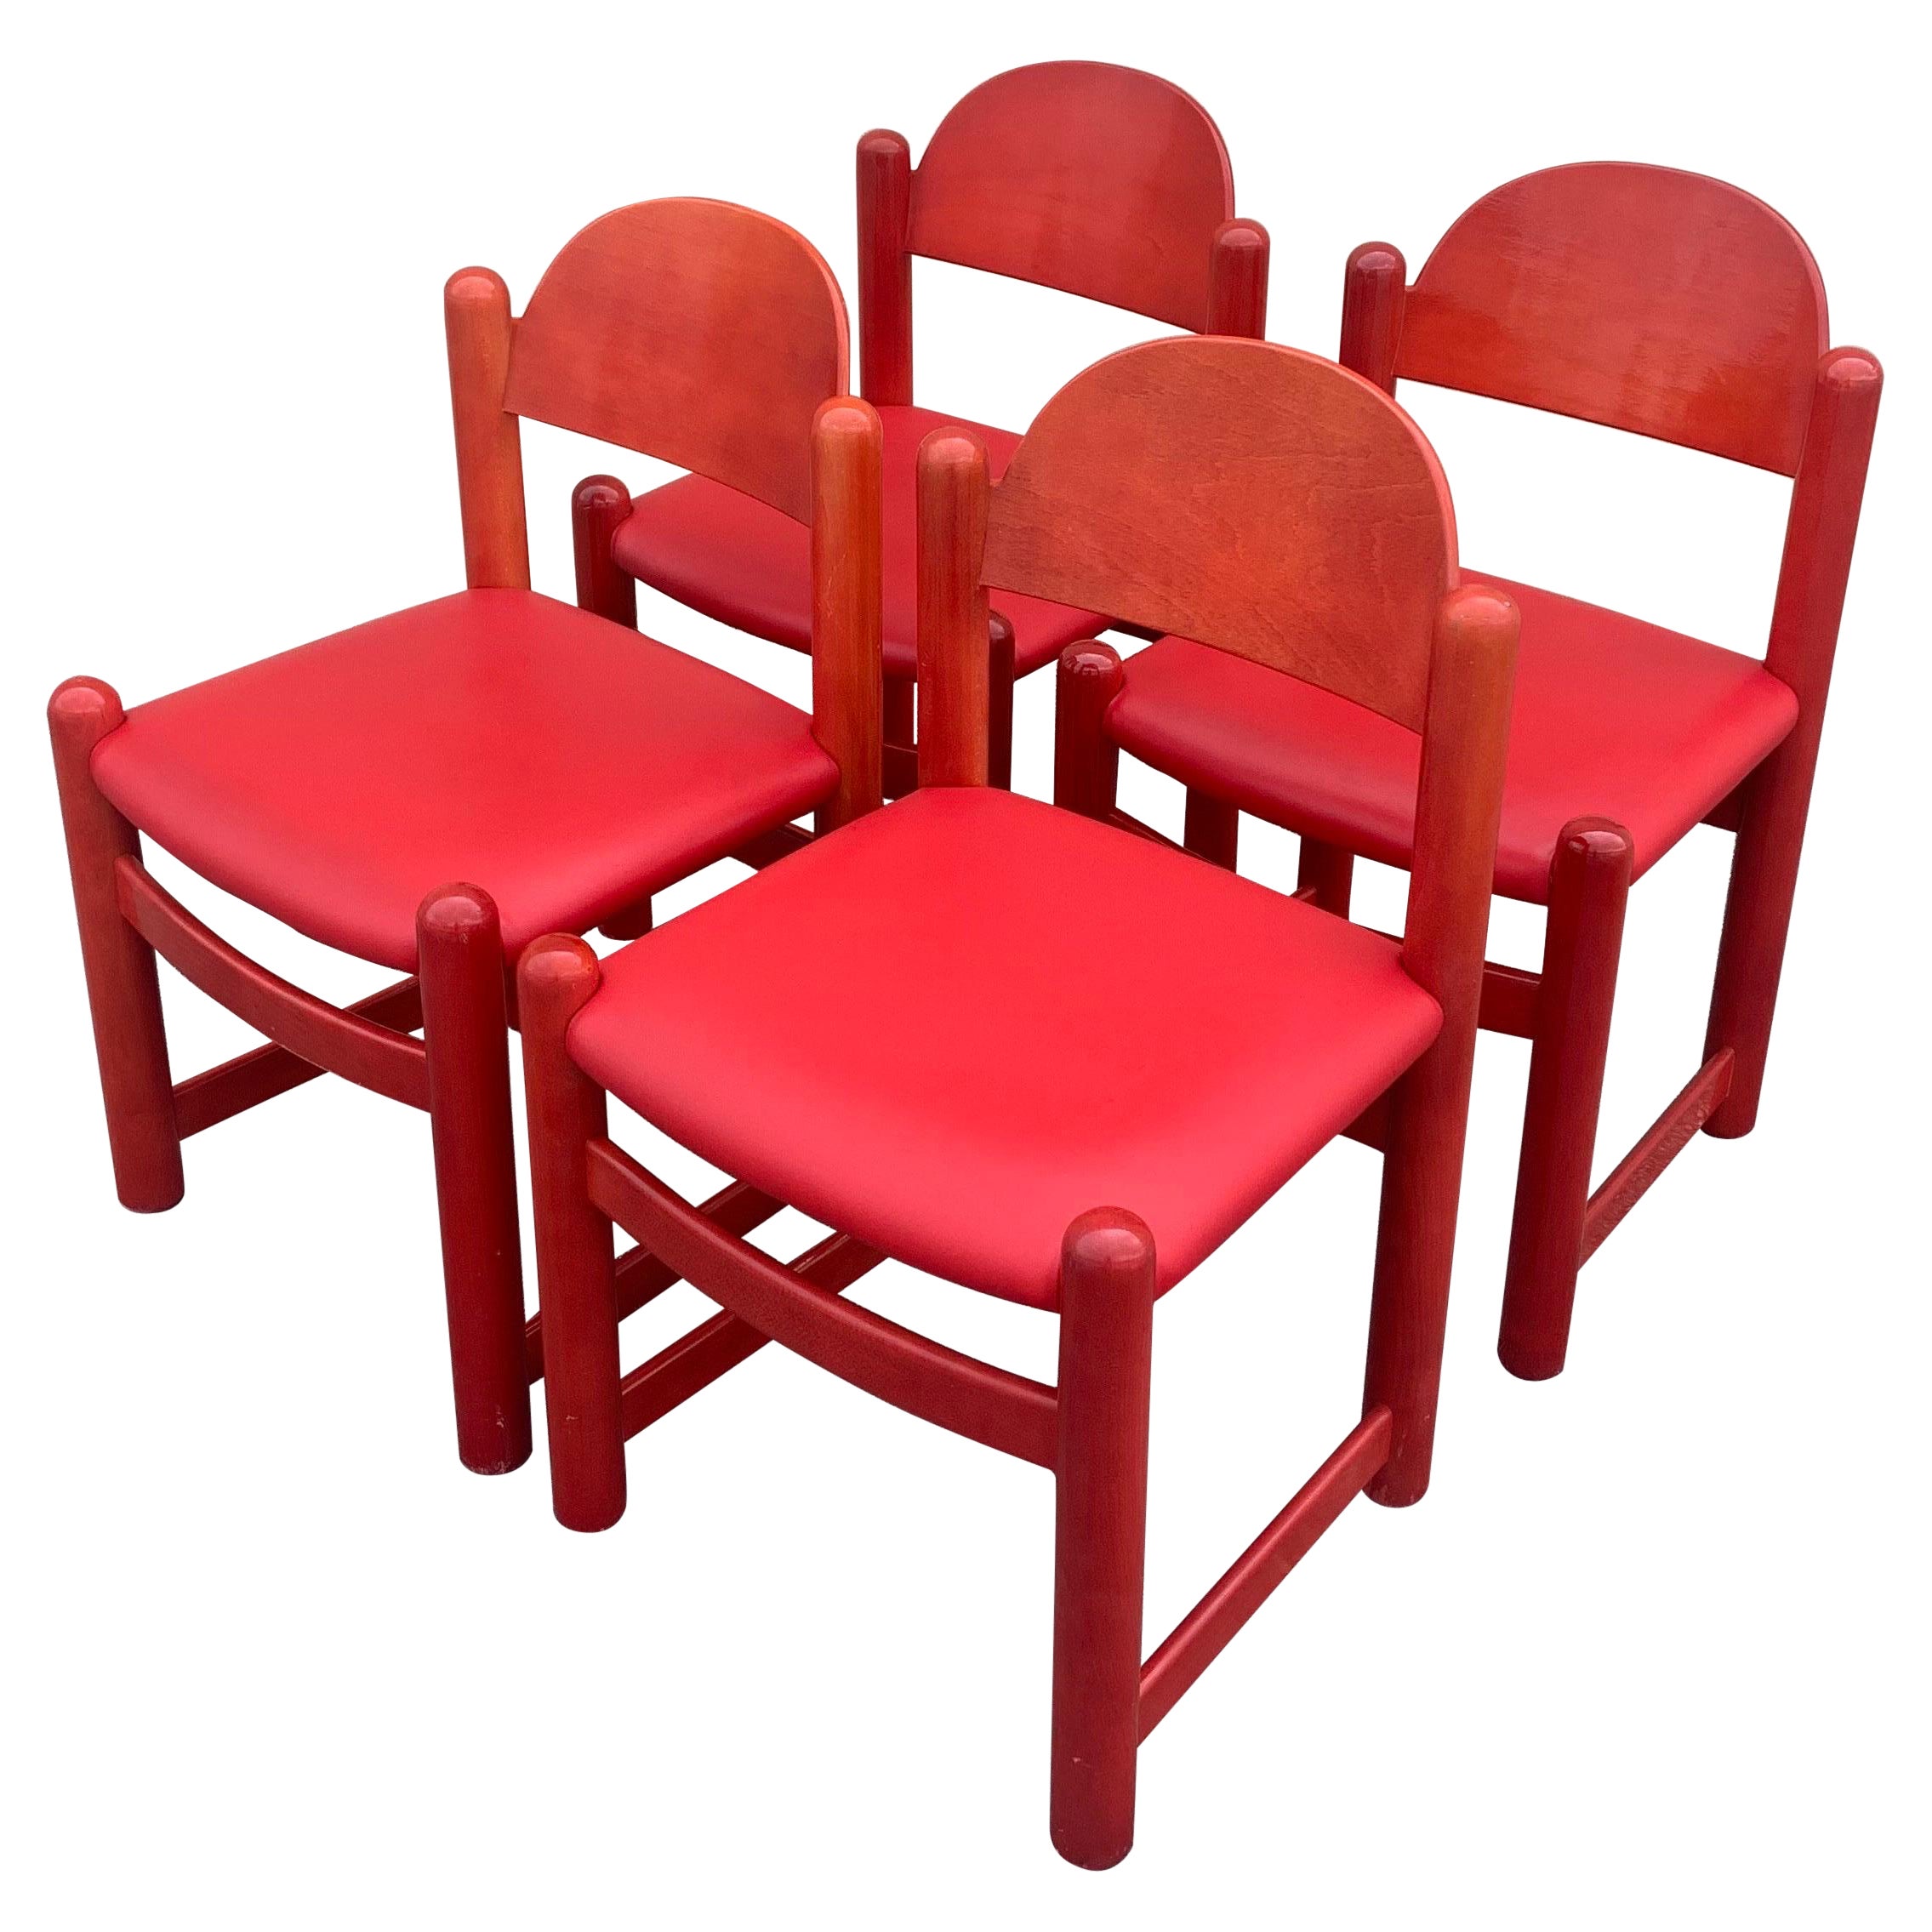 Hank Loewenstein Oak and Leather Chairs in Red, 1970s For Sale